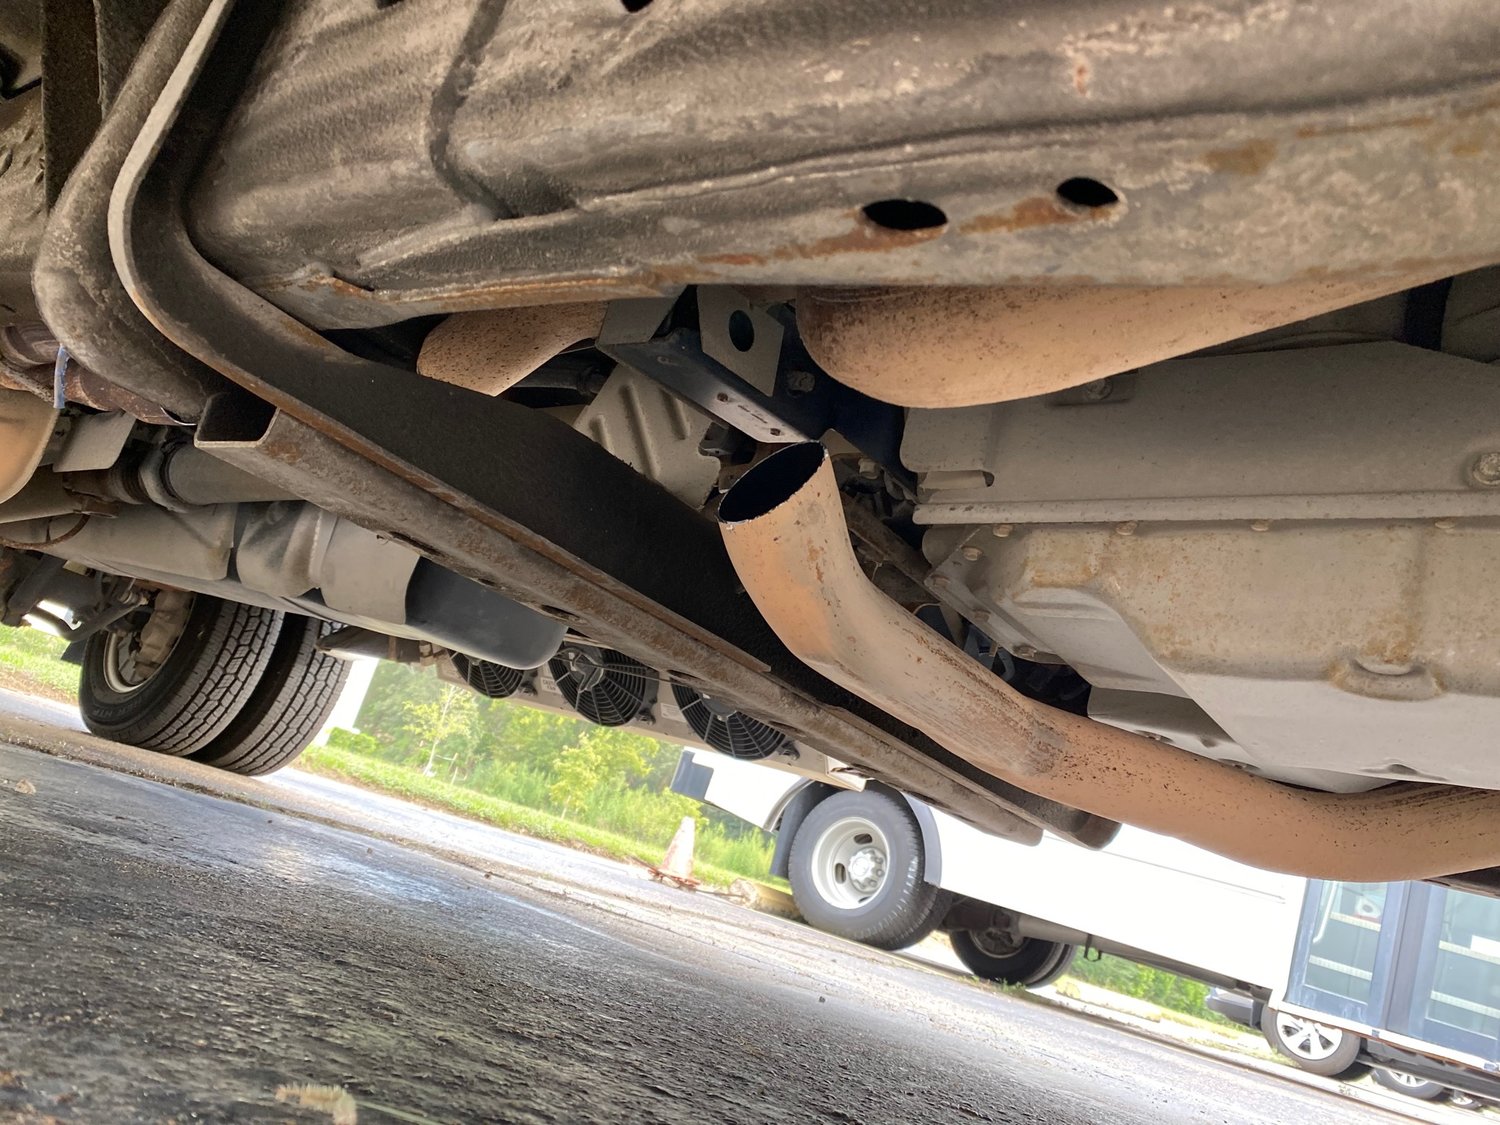 A view underneath the buses shows the space where the catalytic converters should be. The devices, which make engine exhaust less toxic, have various metals in their makeup including platinum, making them valuable items for sales to metal scrap purchasers.